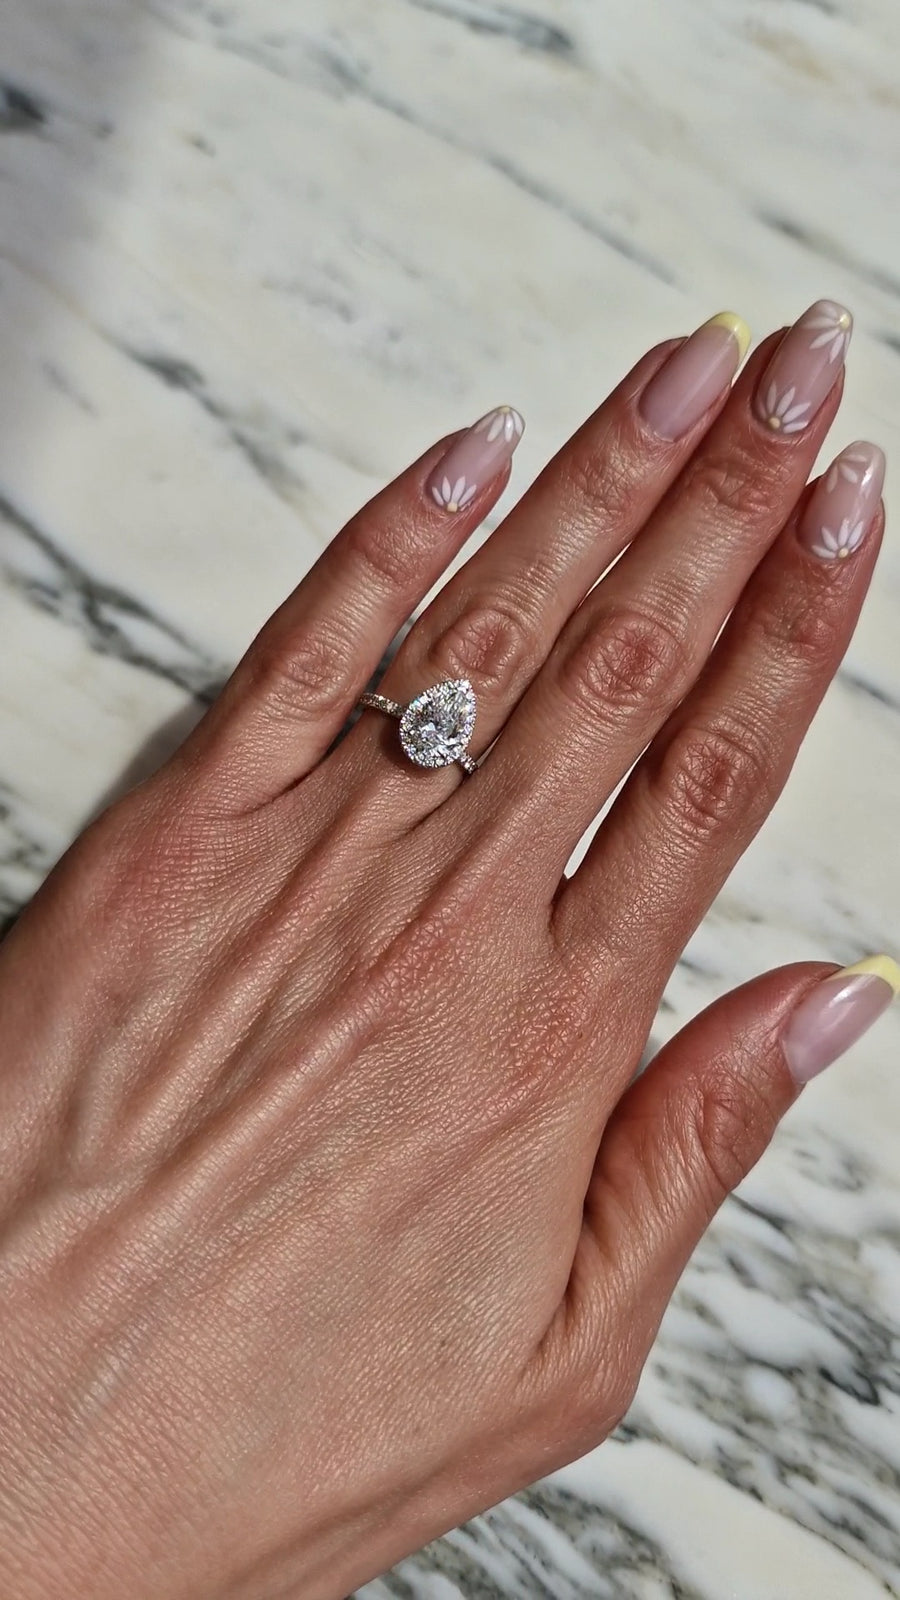 Pear-shaped Diamond Engagement Ring in Platinum